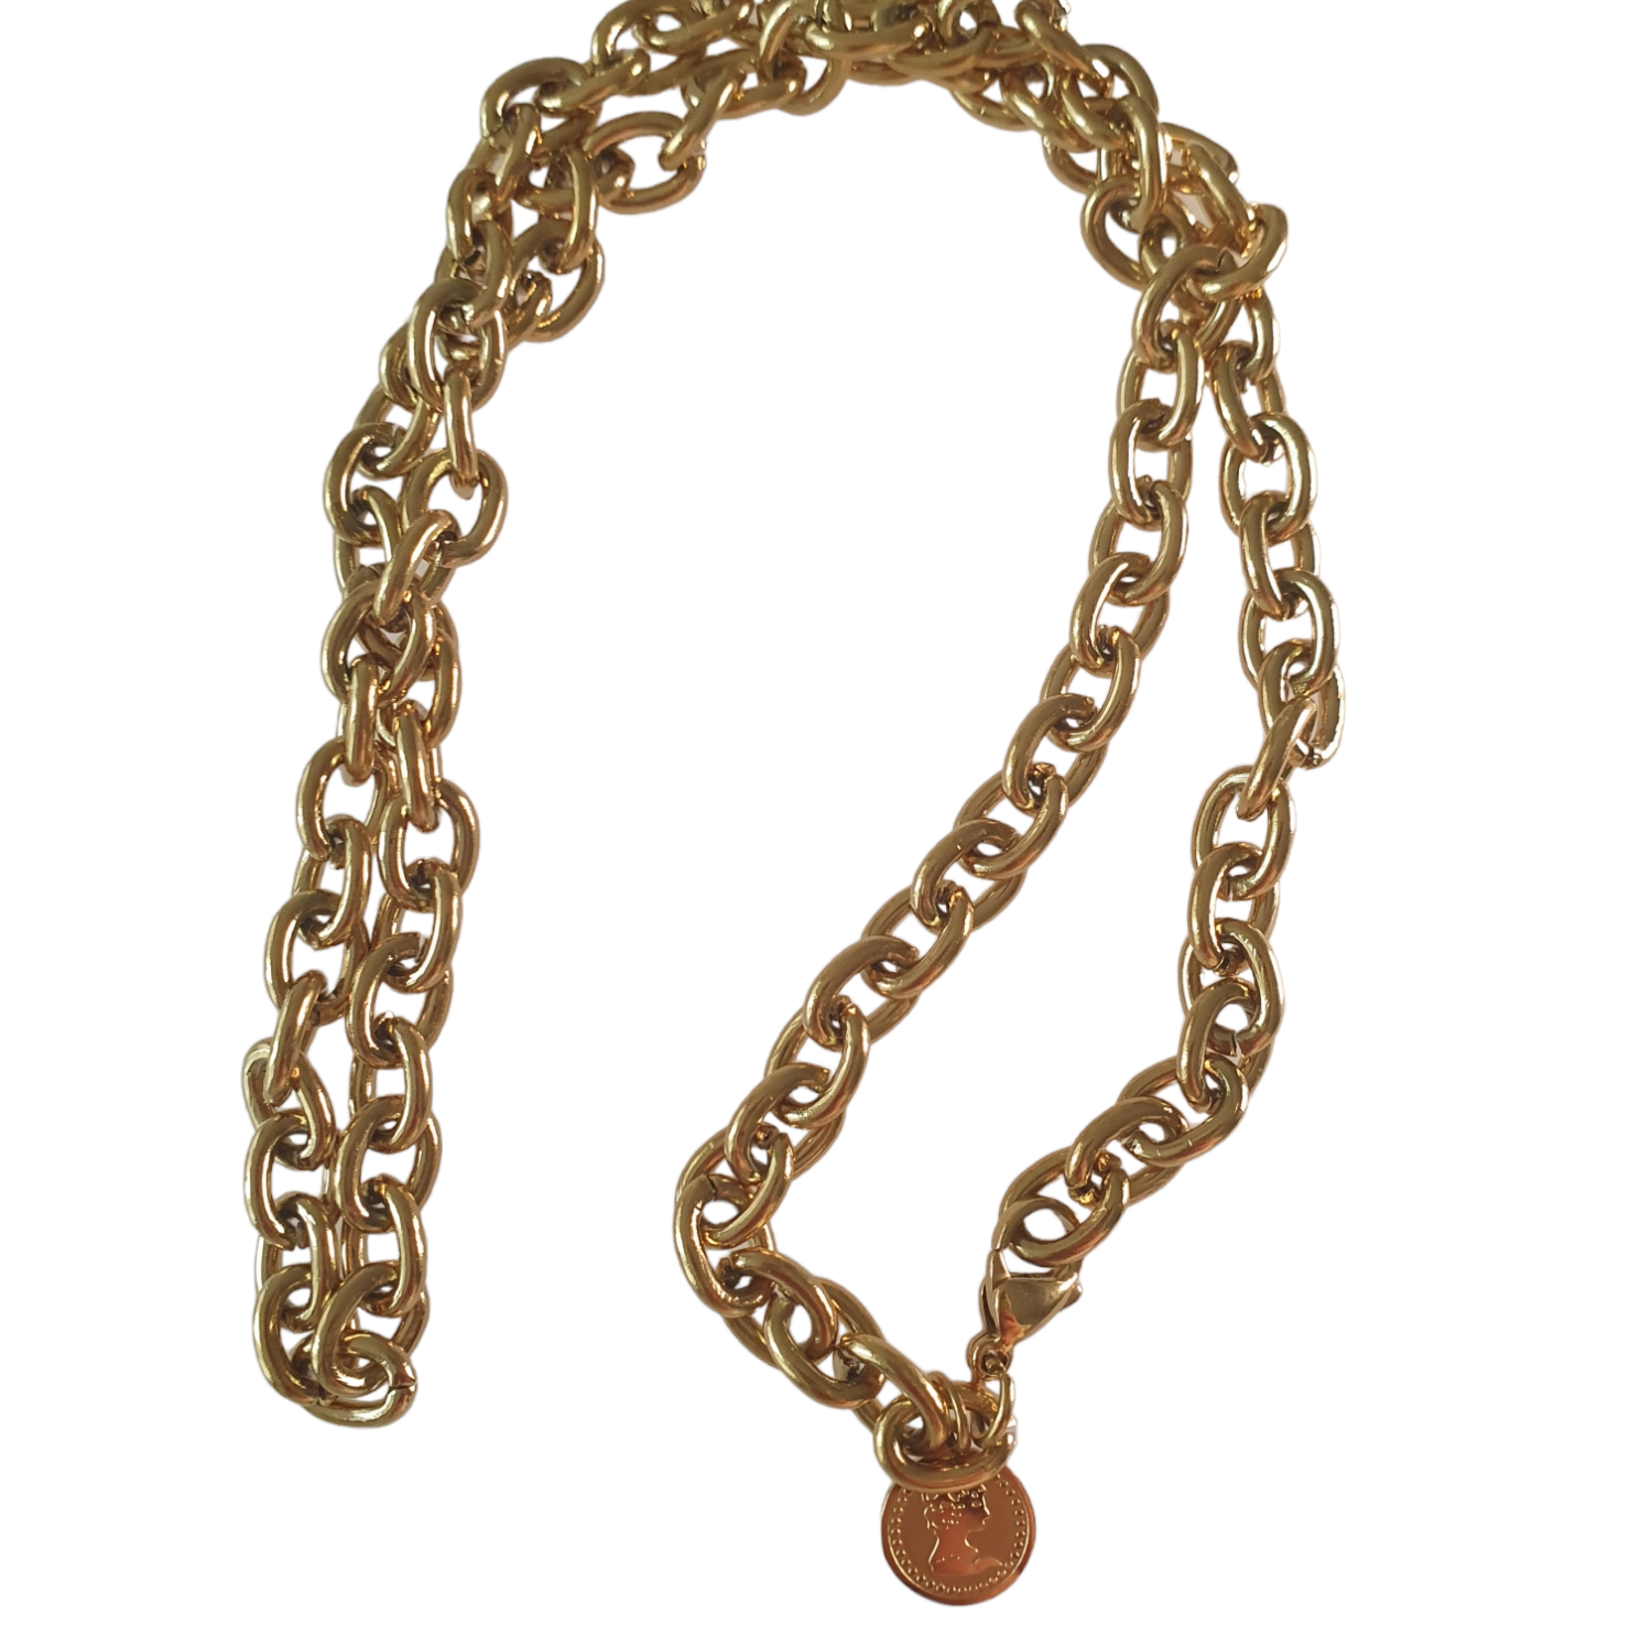 Eve's Gifts 14k Gold Plated Thick Chain Queen Elizabeth